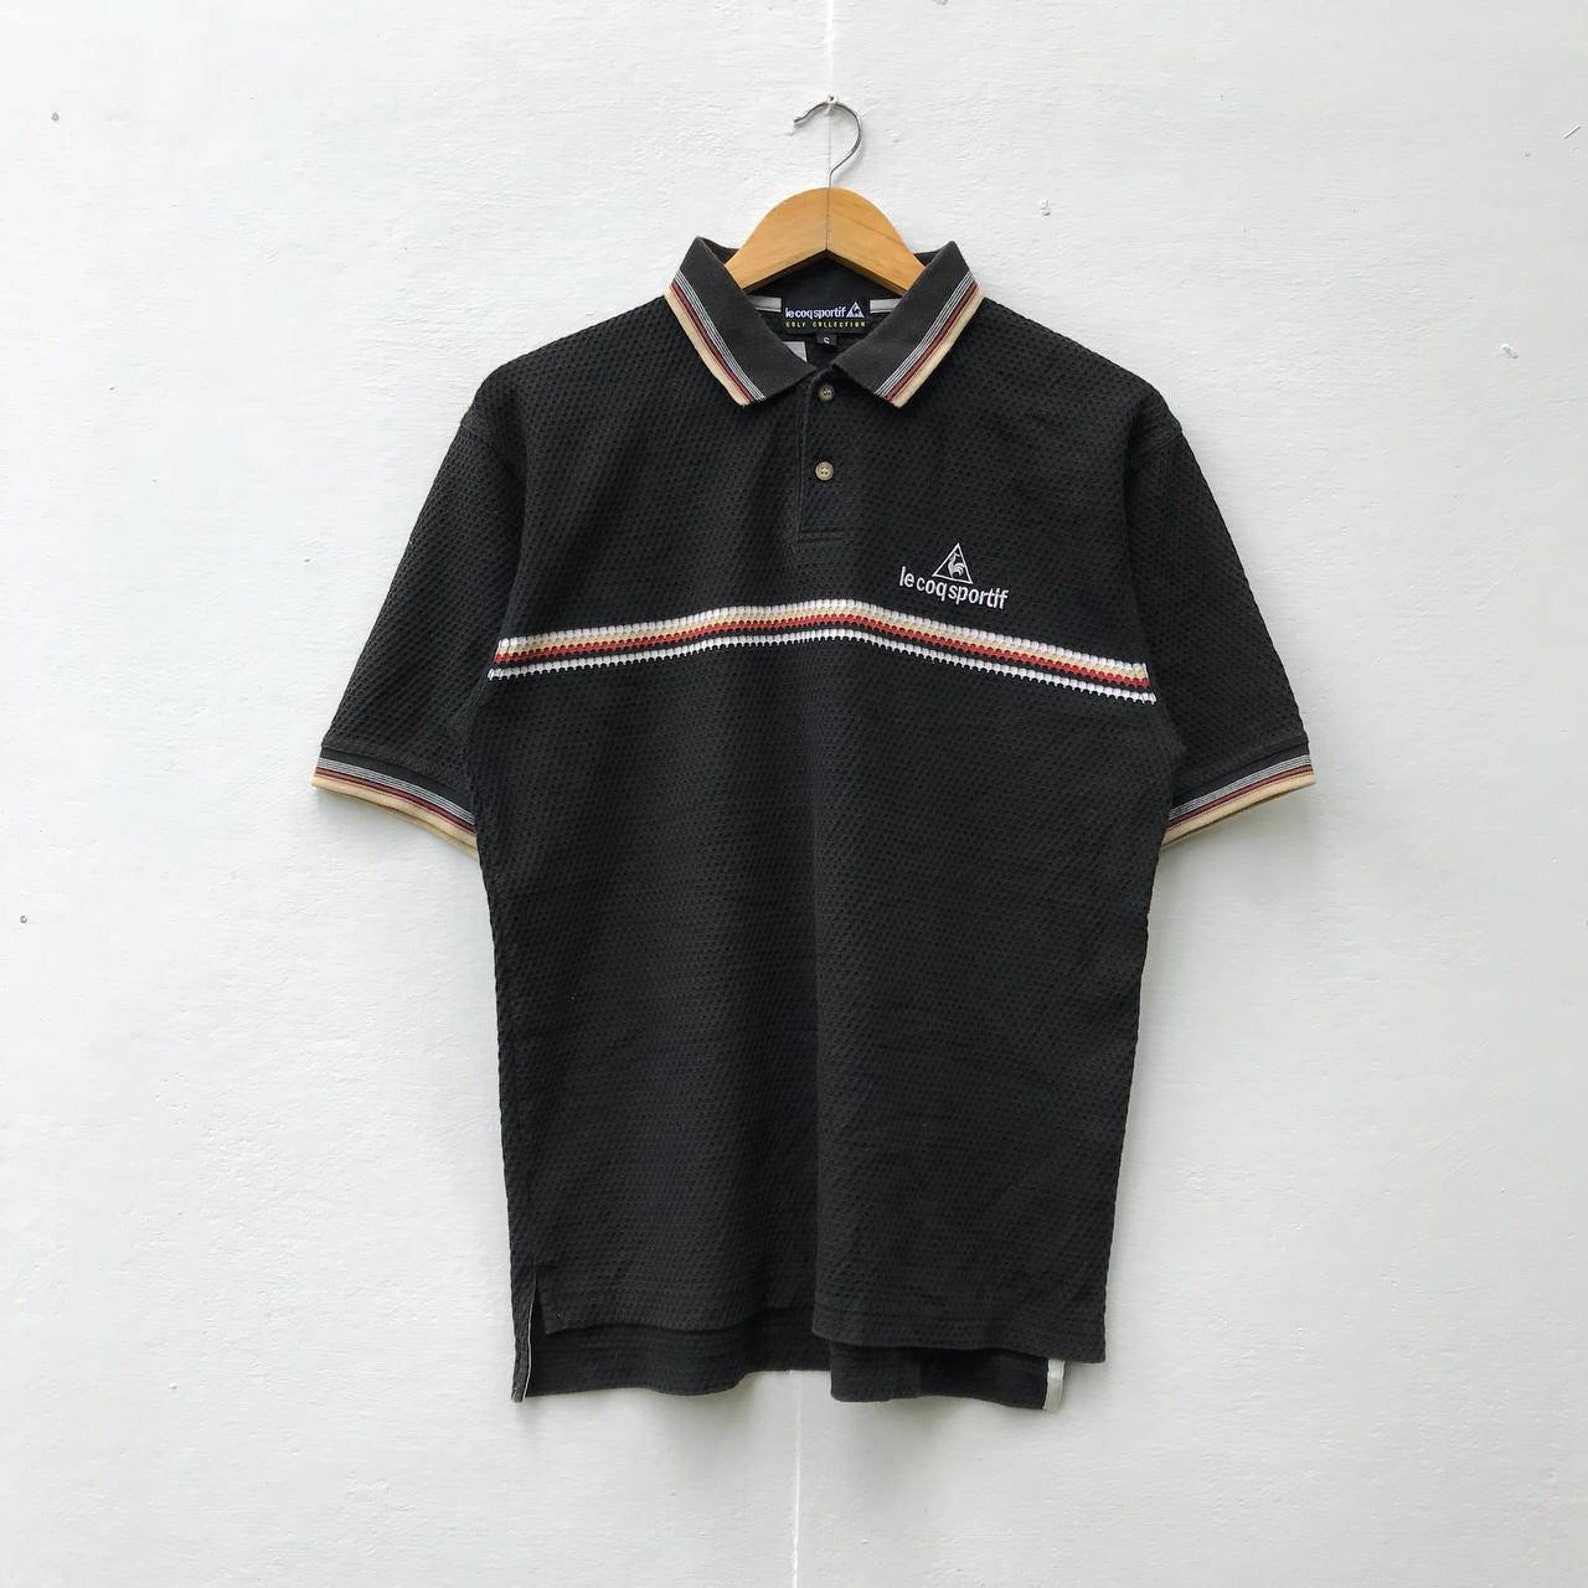 Rare Vintage Le Coq Sportif Golf Collection Embroidery | Etsy